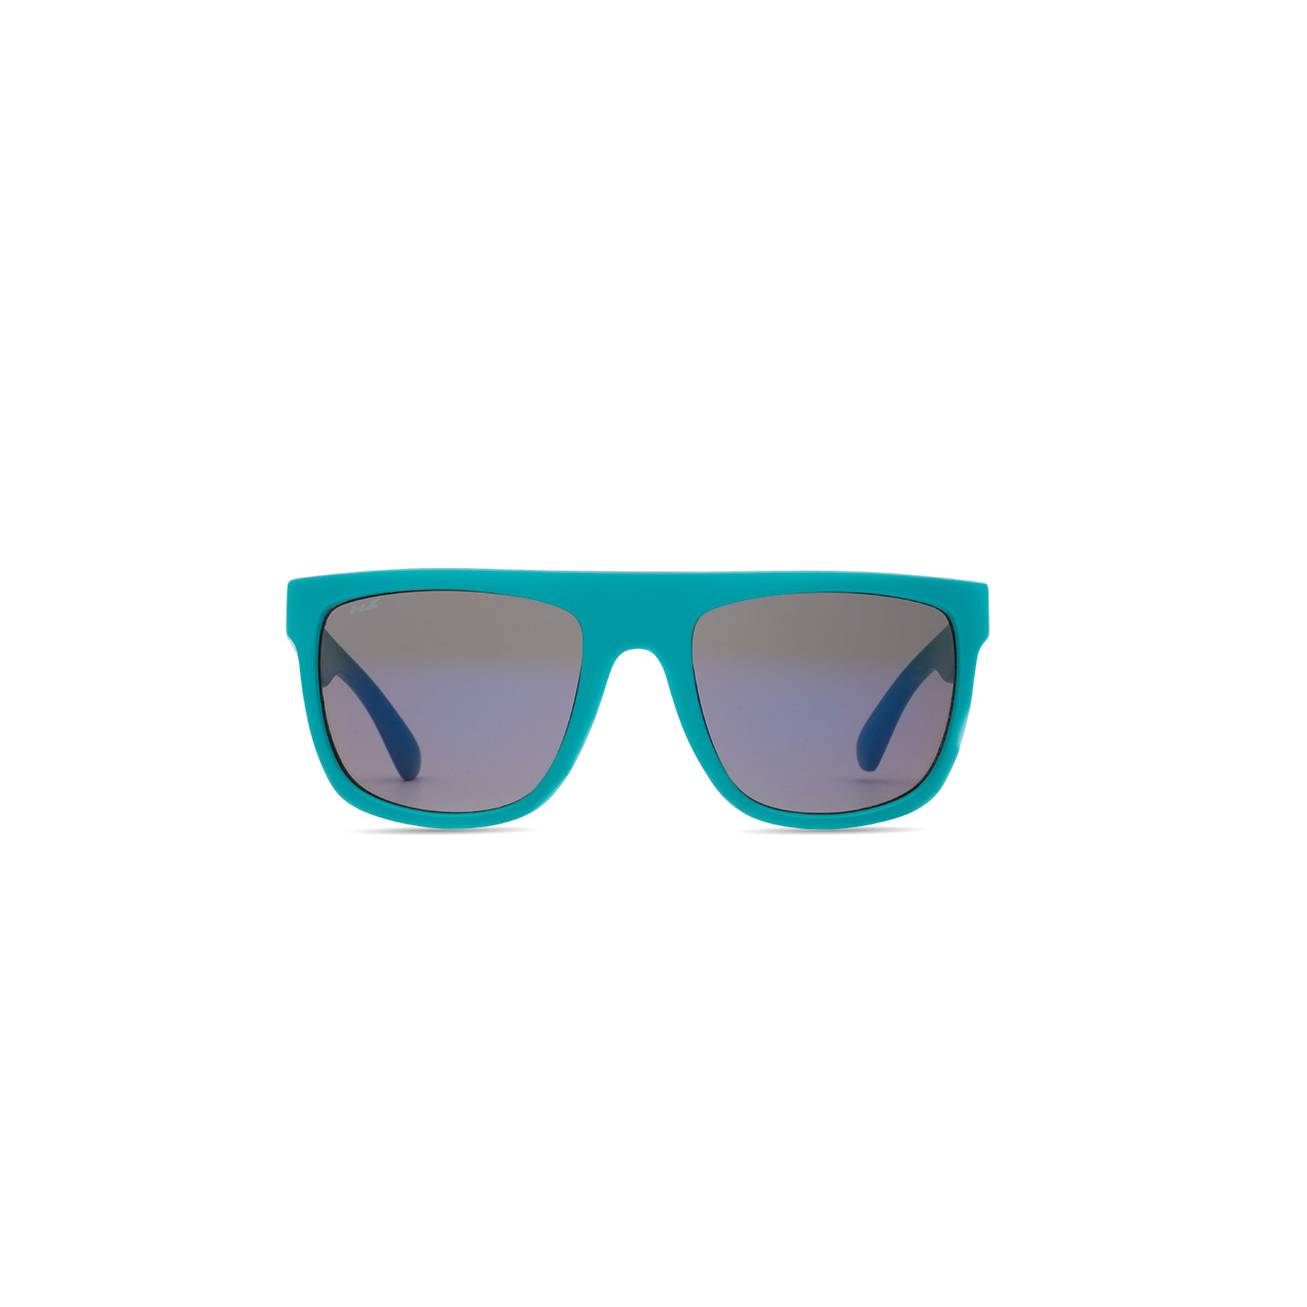 HZ Even-Up SE-600204-HZ sports glasses with blue-toned mirrored lenses